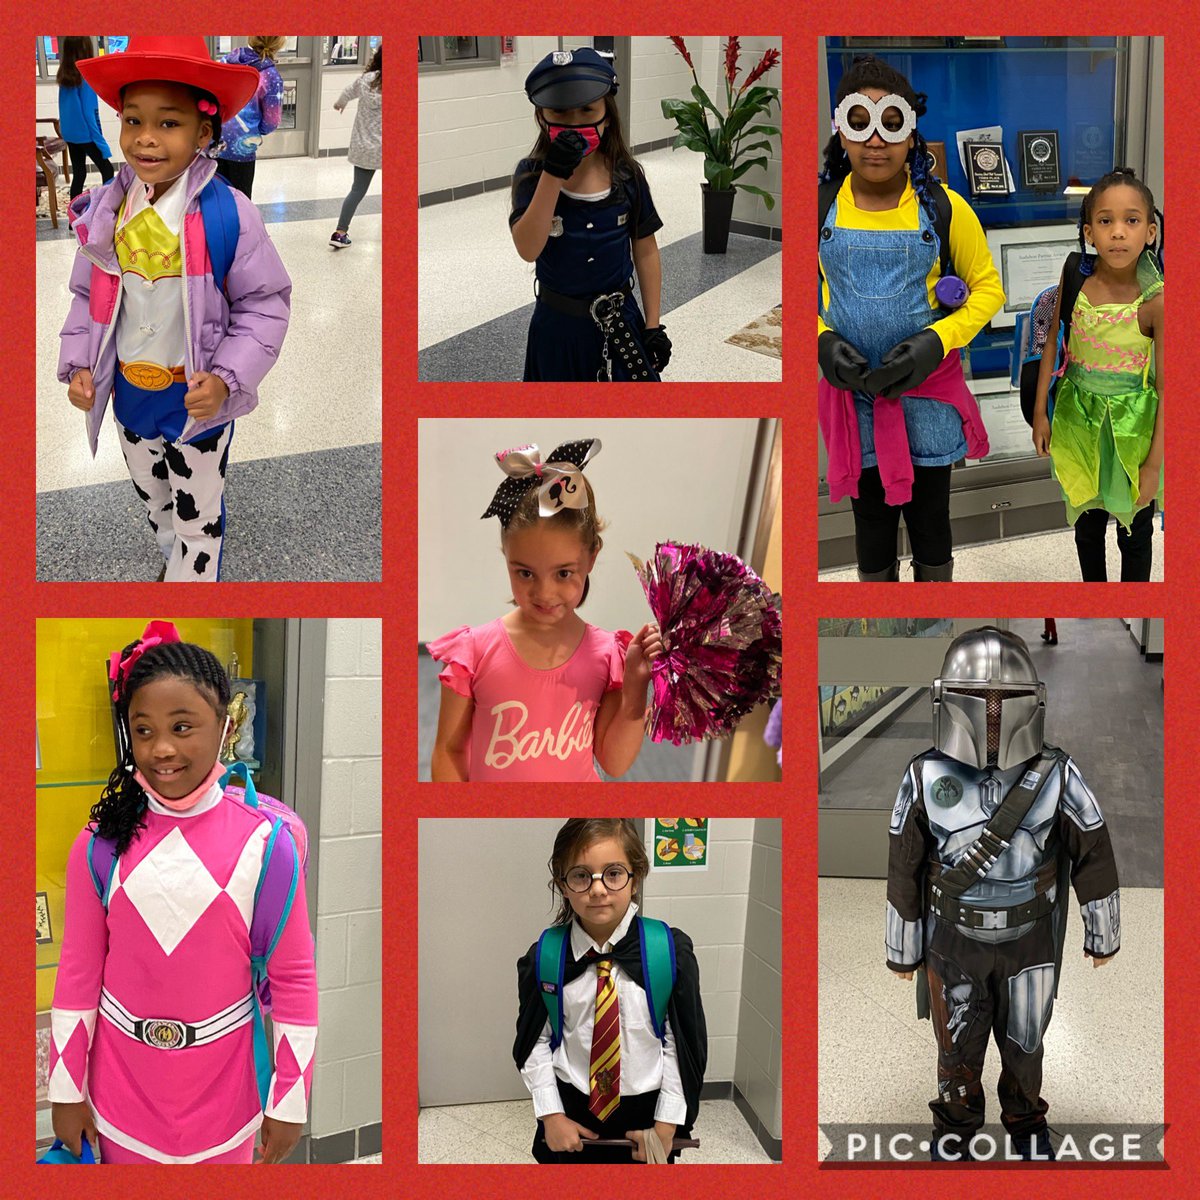 OFE celebrating the final day of Red Ribbon Week by dressing as our favorite storybook character because “Drugs Destroy Your Character” @HumbleISD_OFE #RedRibbonWeek2020